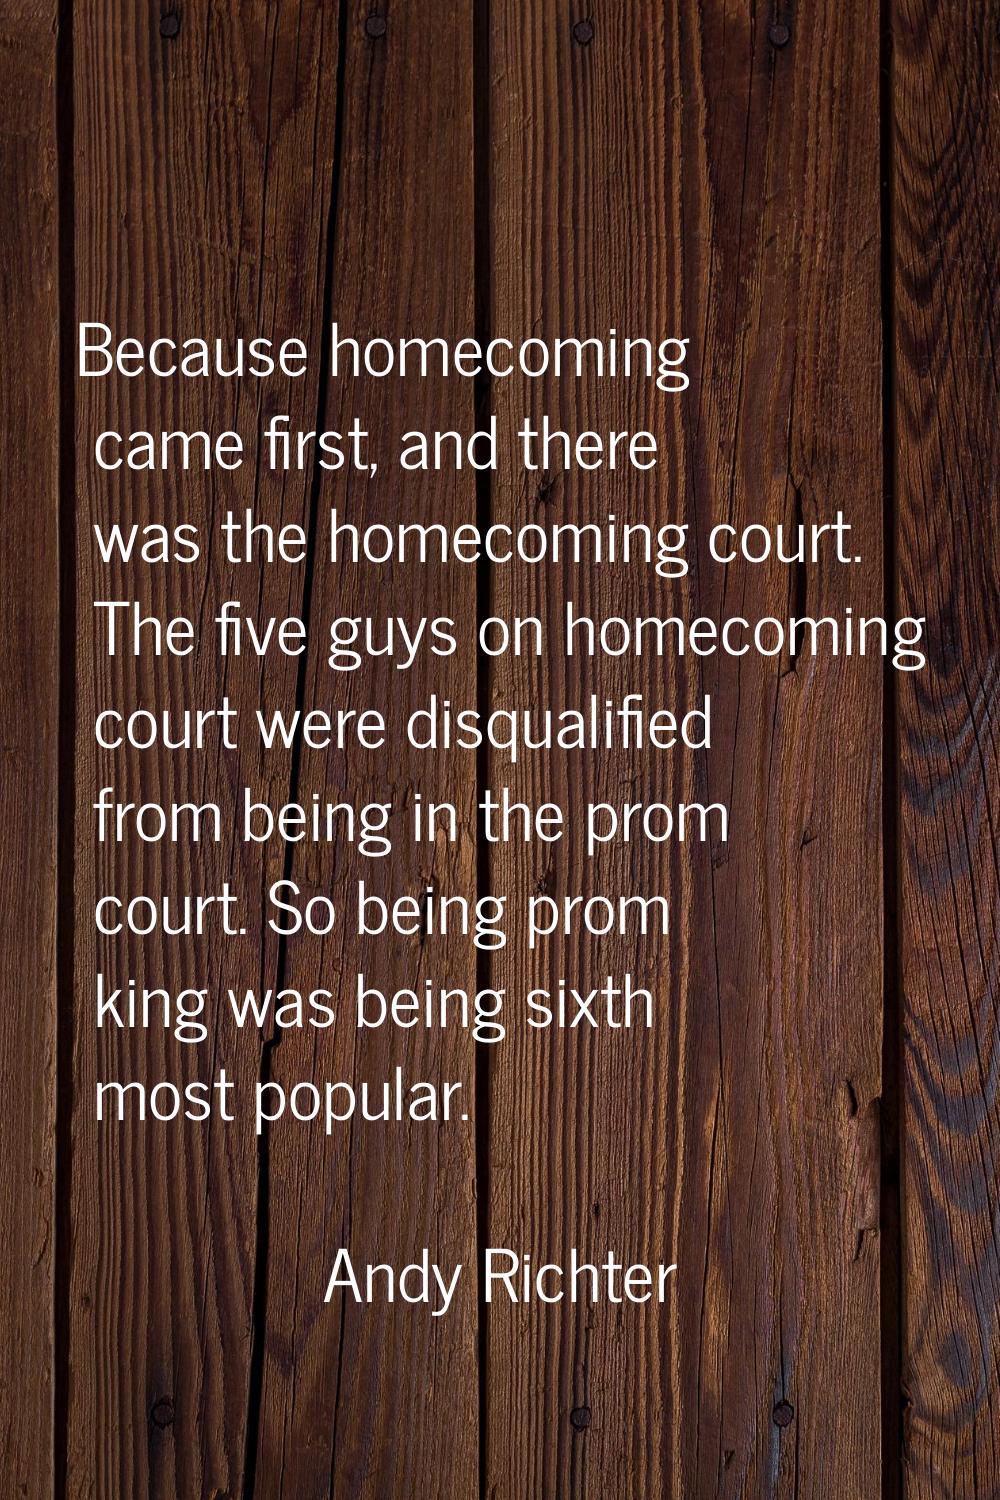 Because homecoming came first, and there was the homecoming court. The five guys on homecoming cour